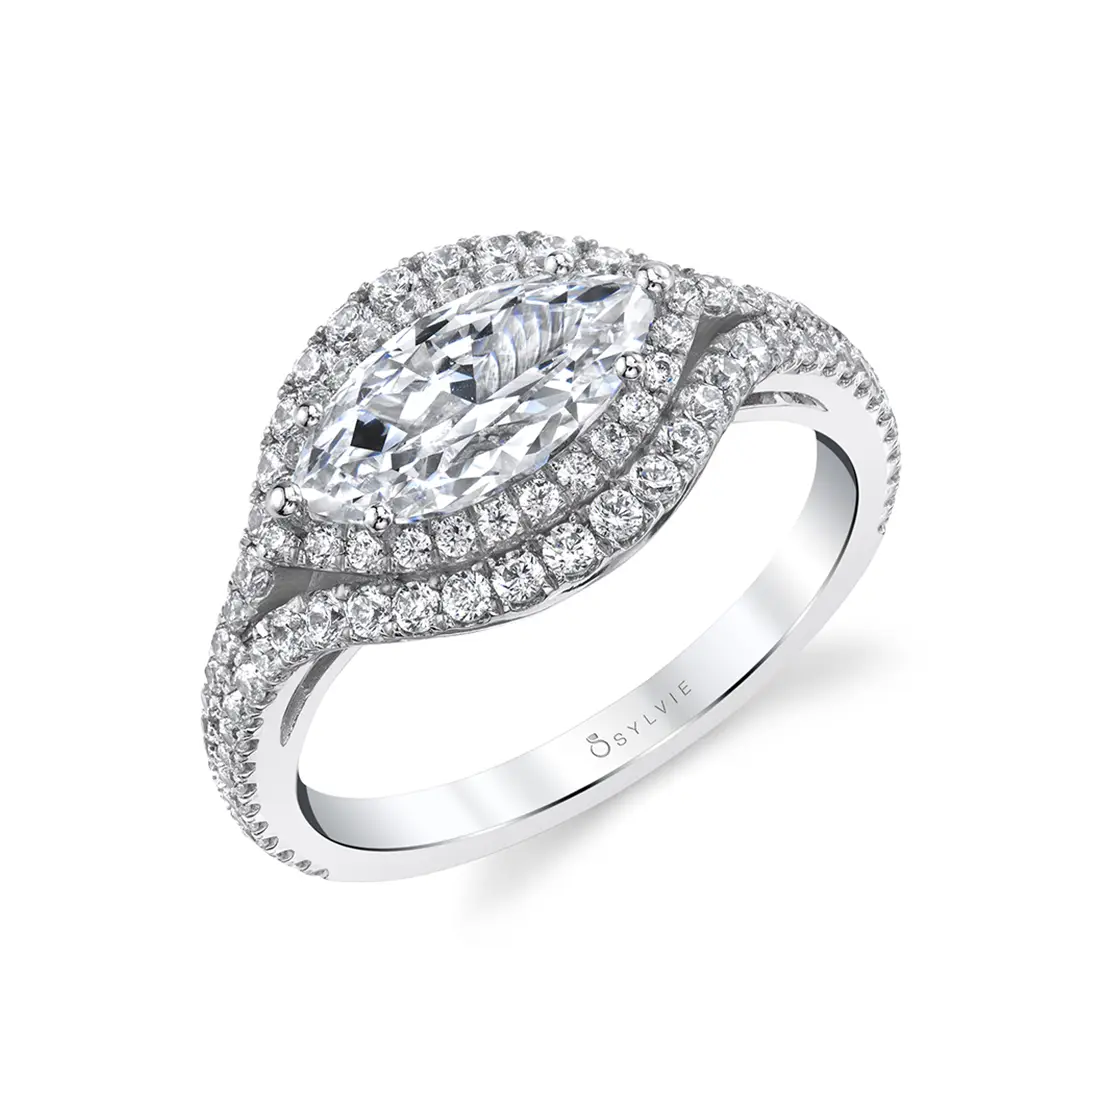 Marquise Shaped Ring with Halo in White Gold - Eleanora